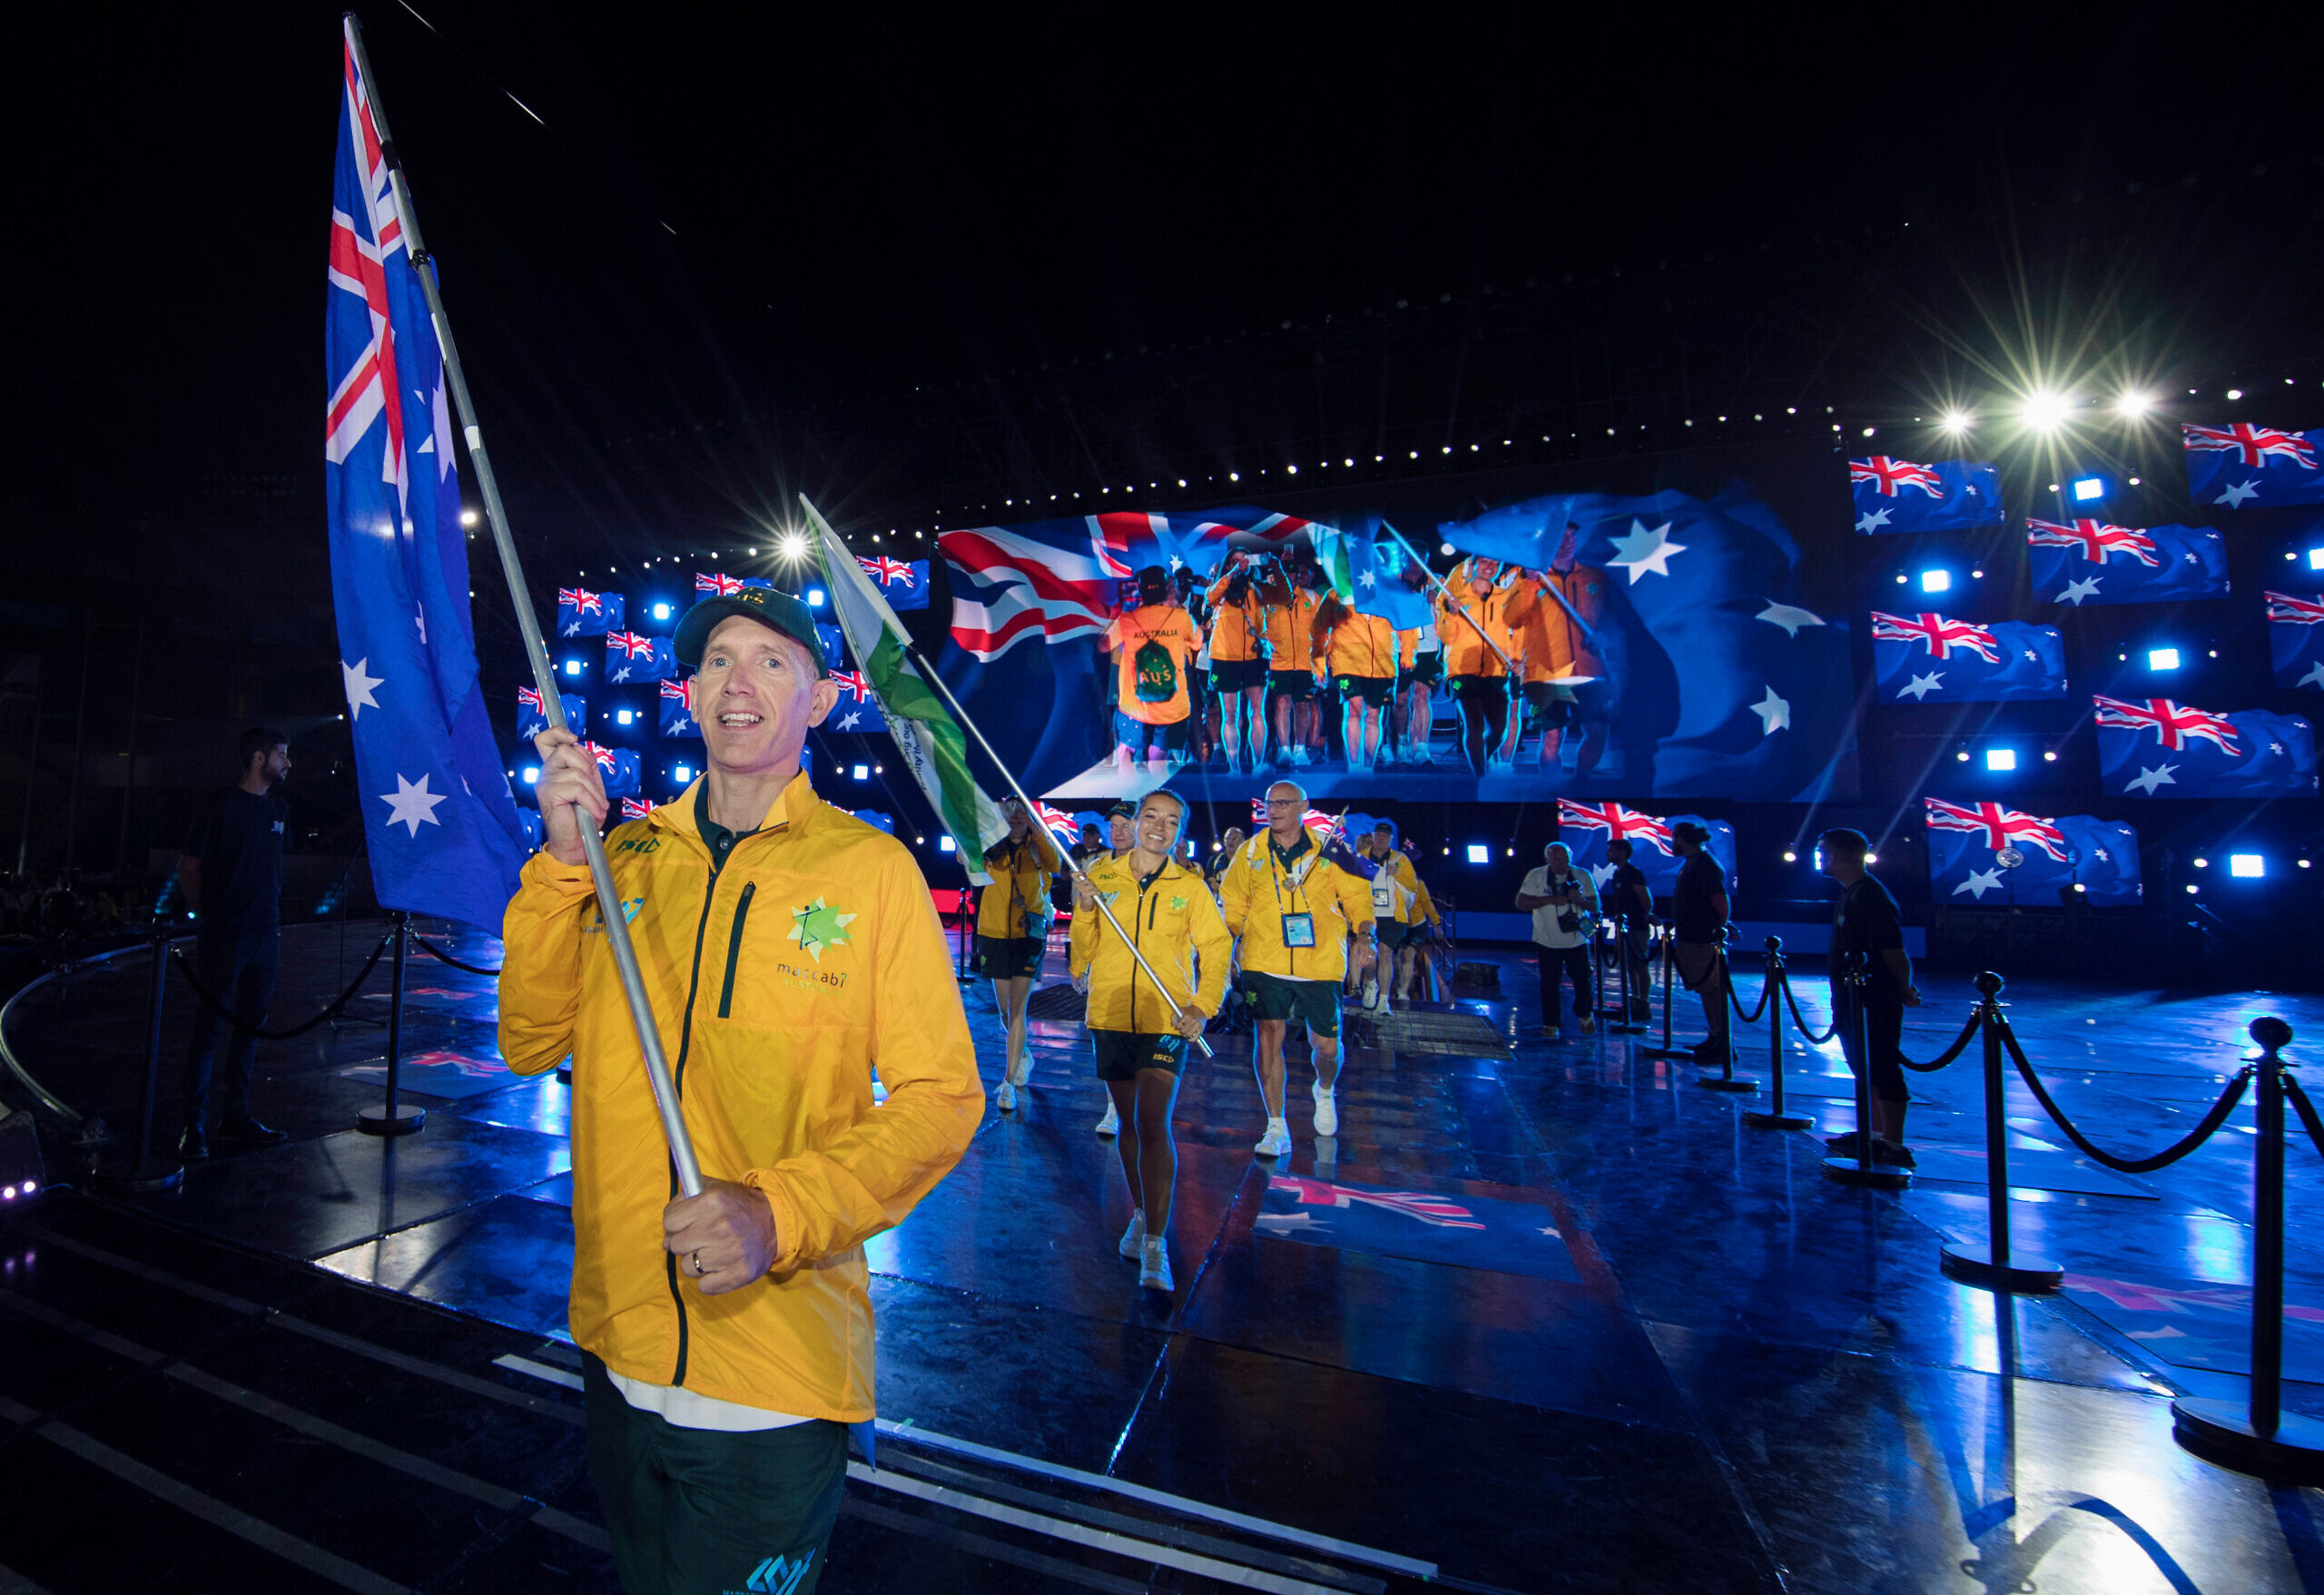 Sean Bloch carries the Australian flag at the 2017 Maccabiah Games opening ceremony. Photo: Julie Kerbel